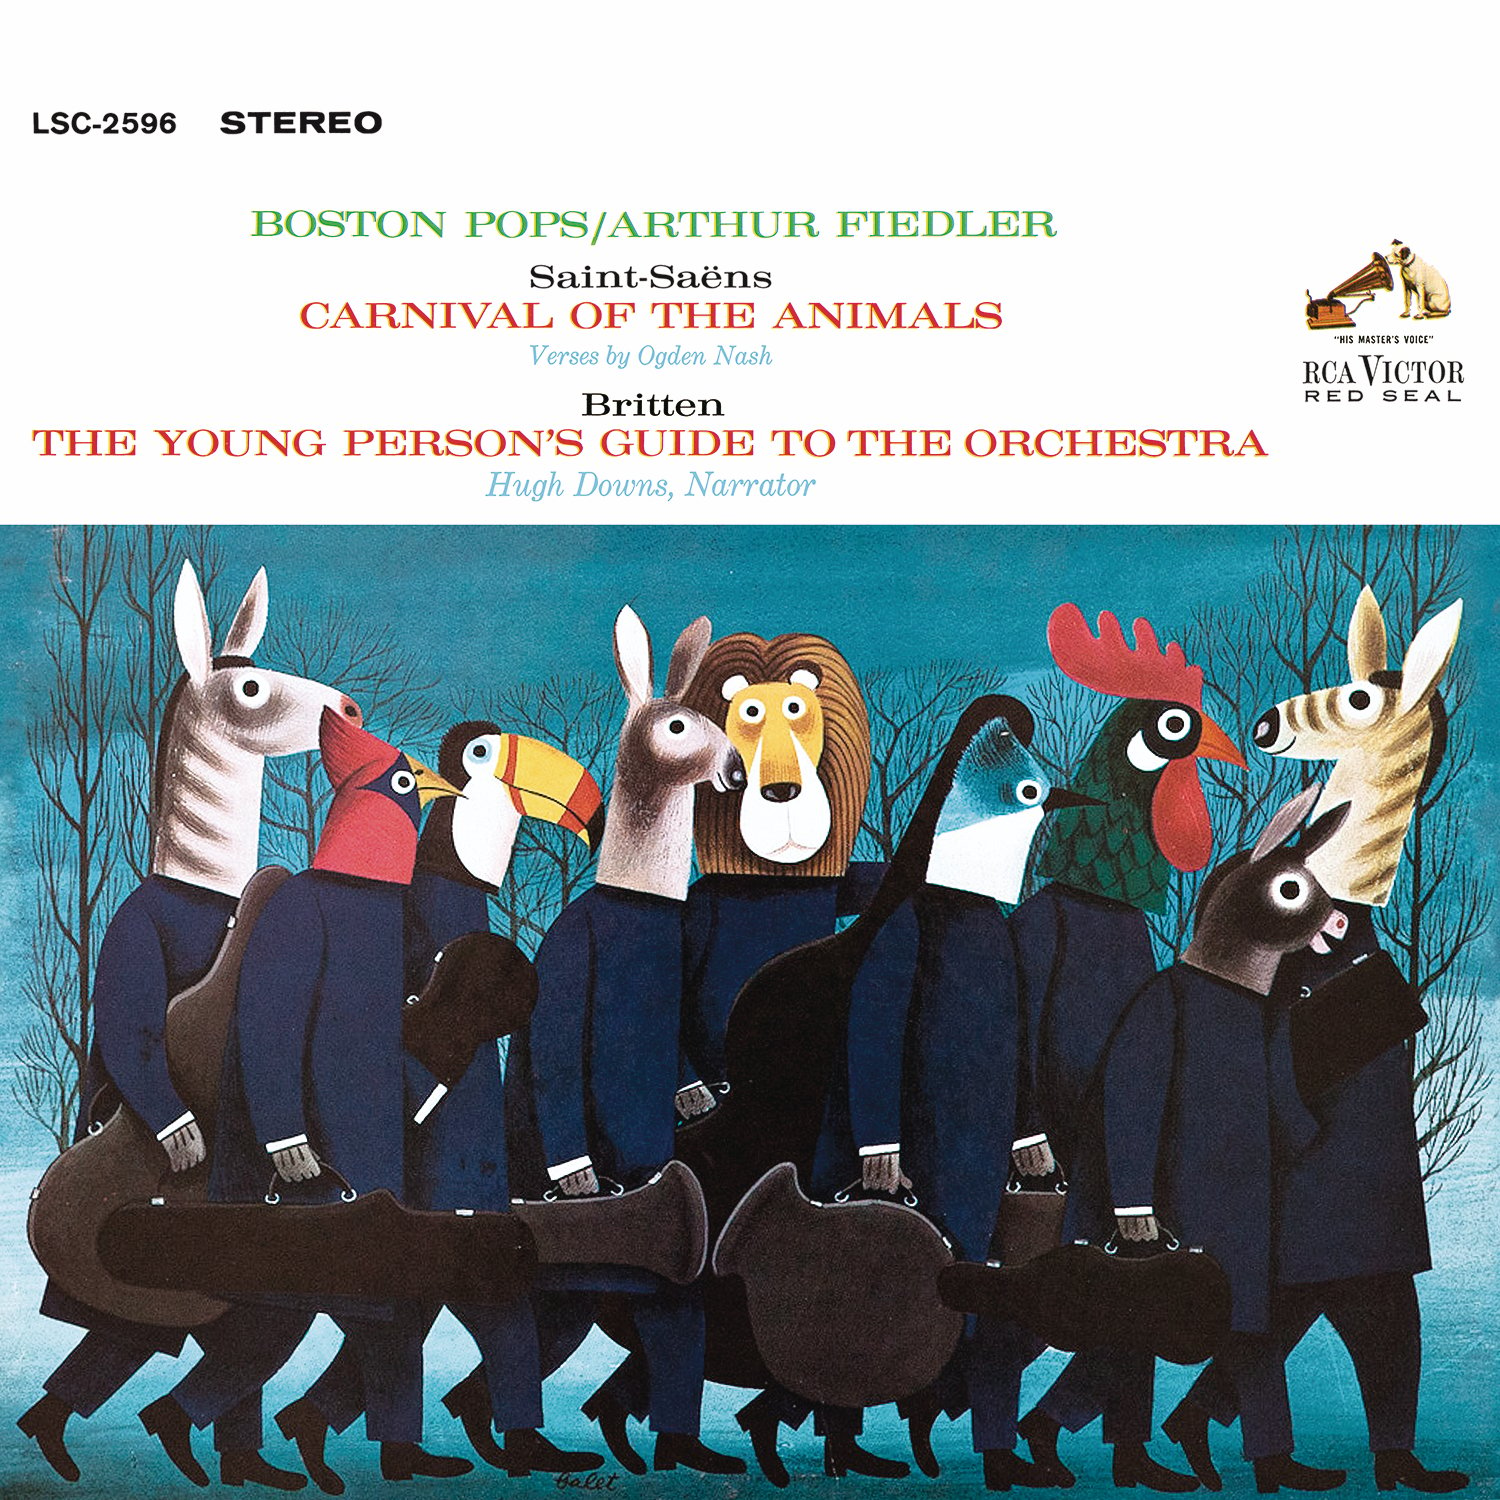 Arthur Fiedler - Saint-Saens: Carnival of the Animals - Britten: The Young Person's Guide to the Orchestra, Op. 34